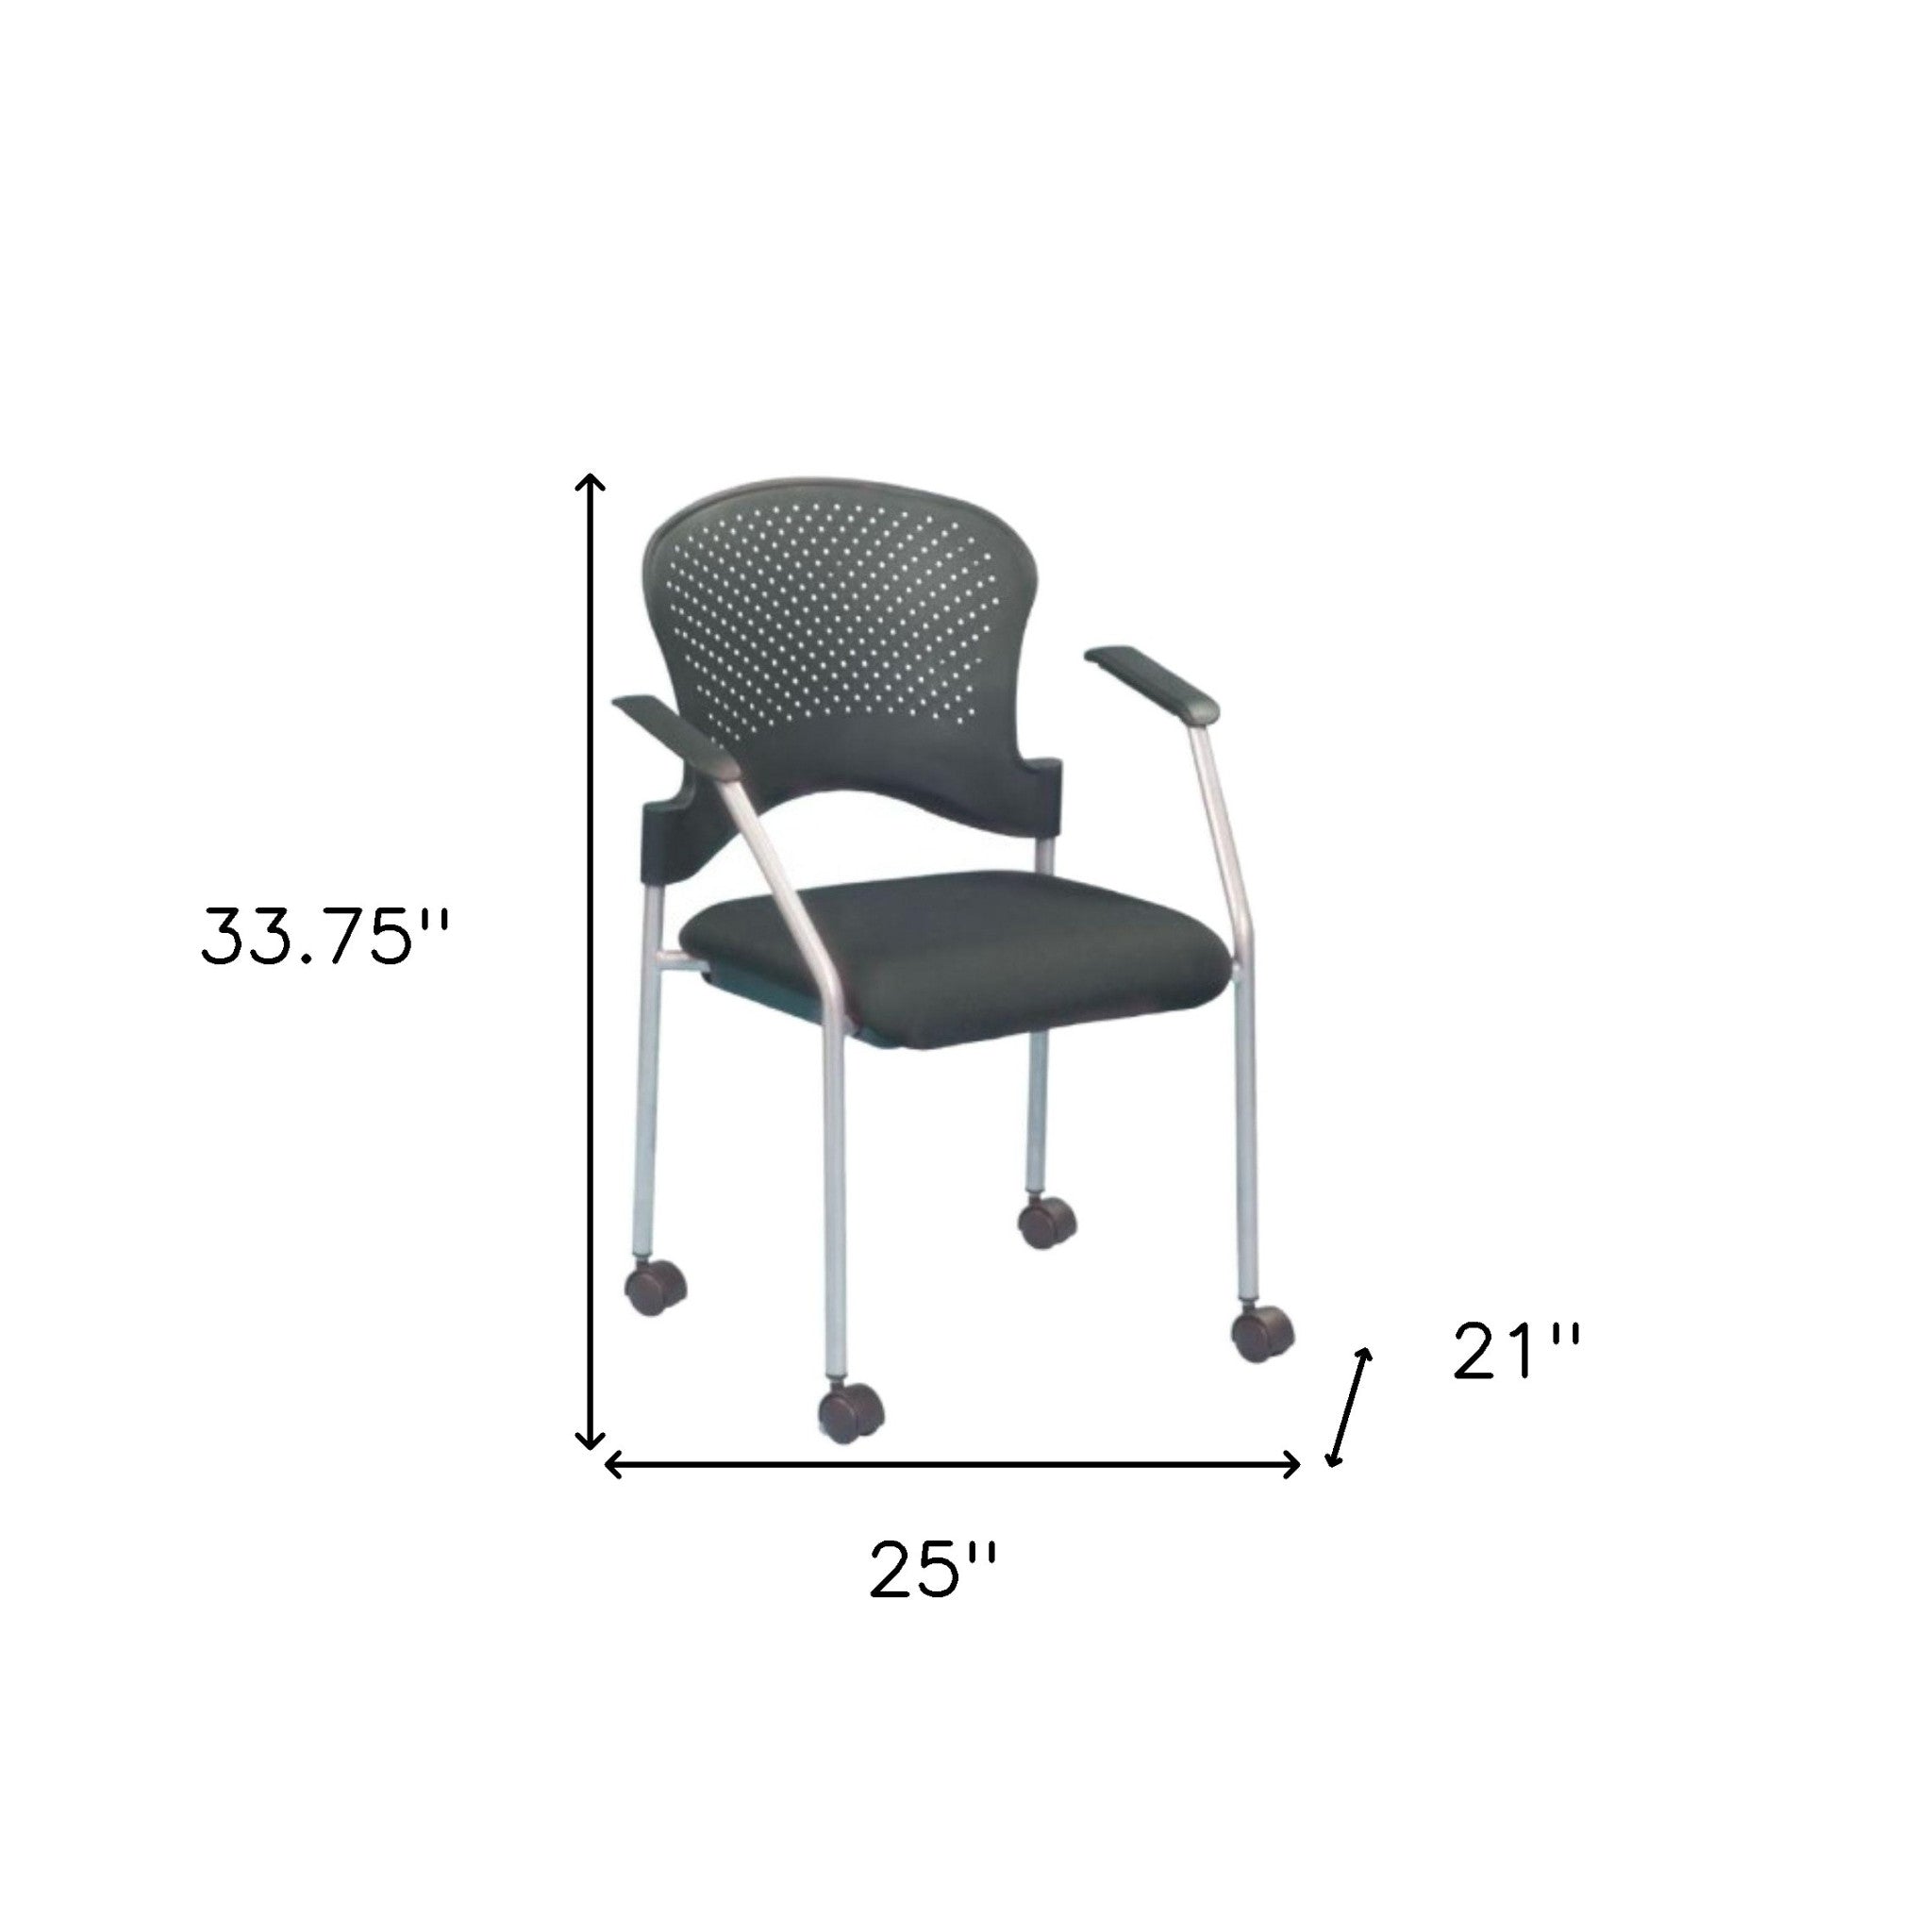 Black and White Plastic Rolling Office Chair